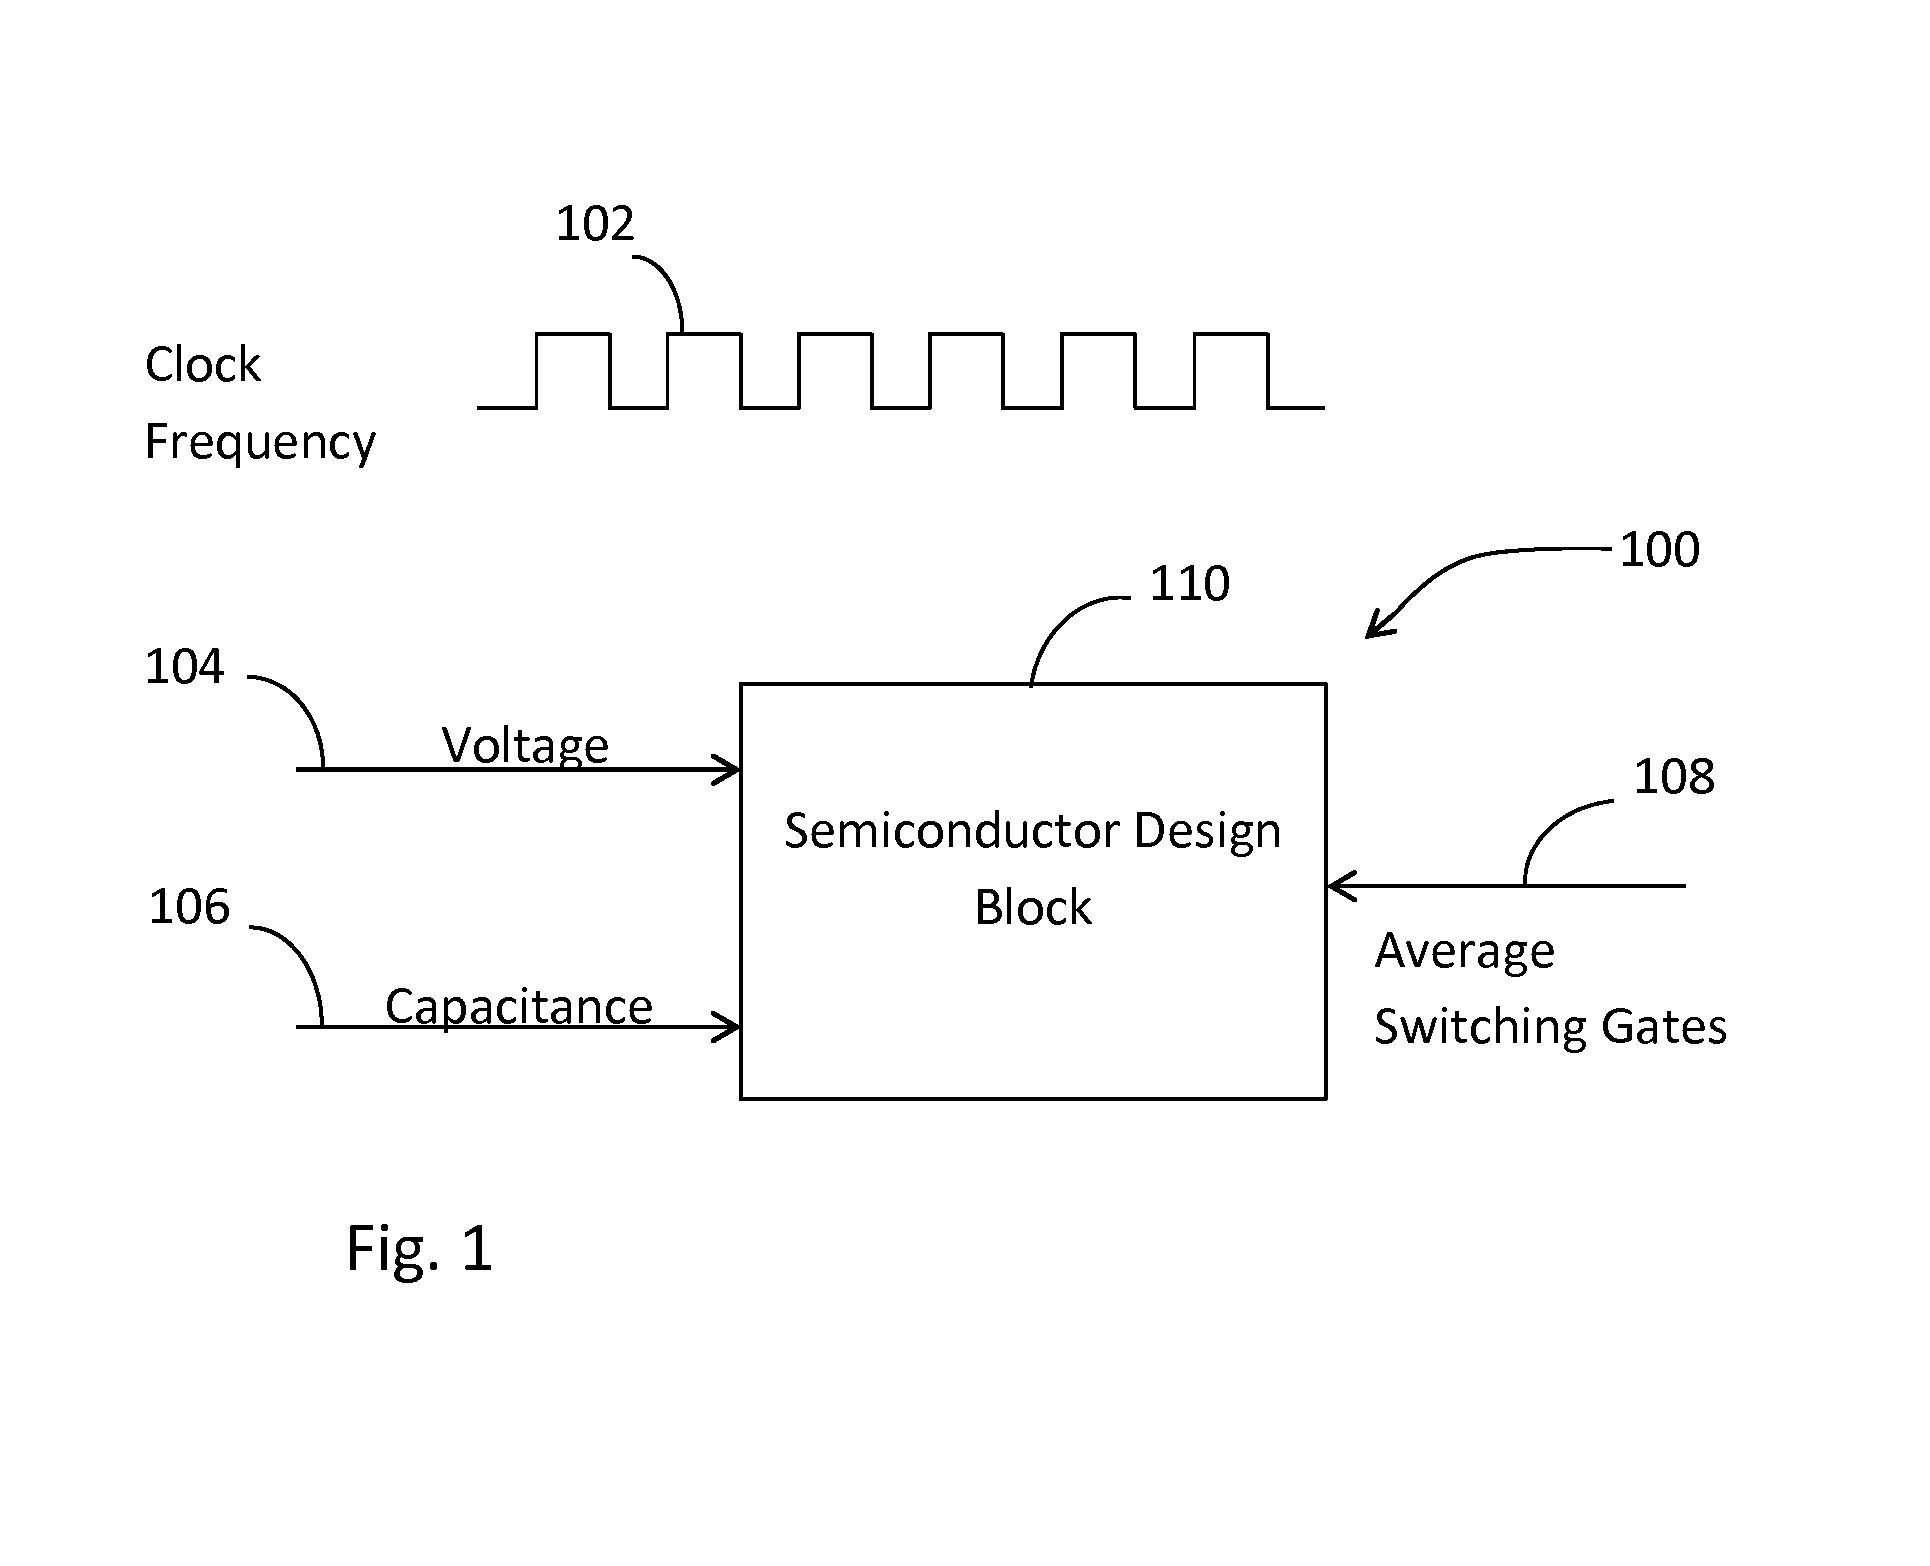 Method for power estimation for virtual prototyping models for semiconductors